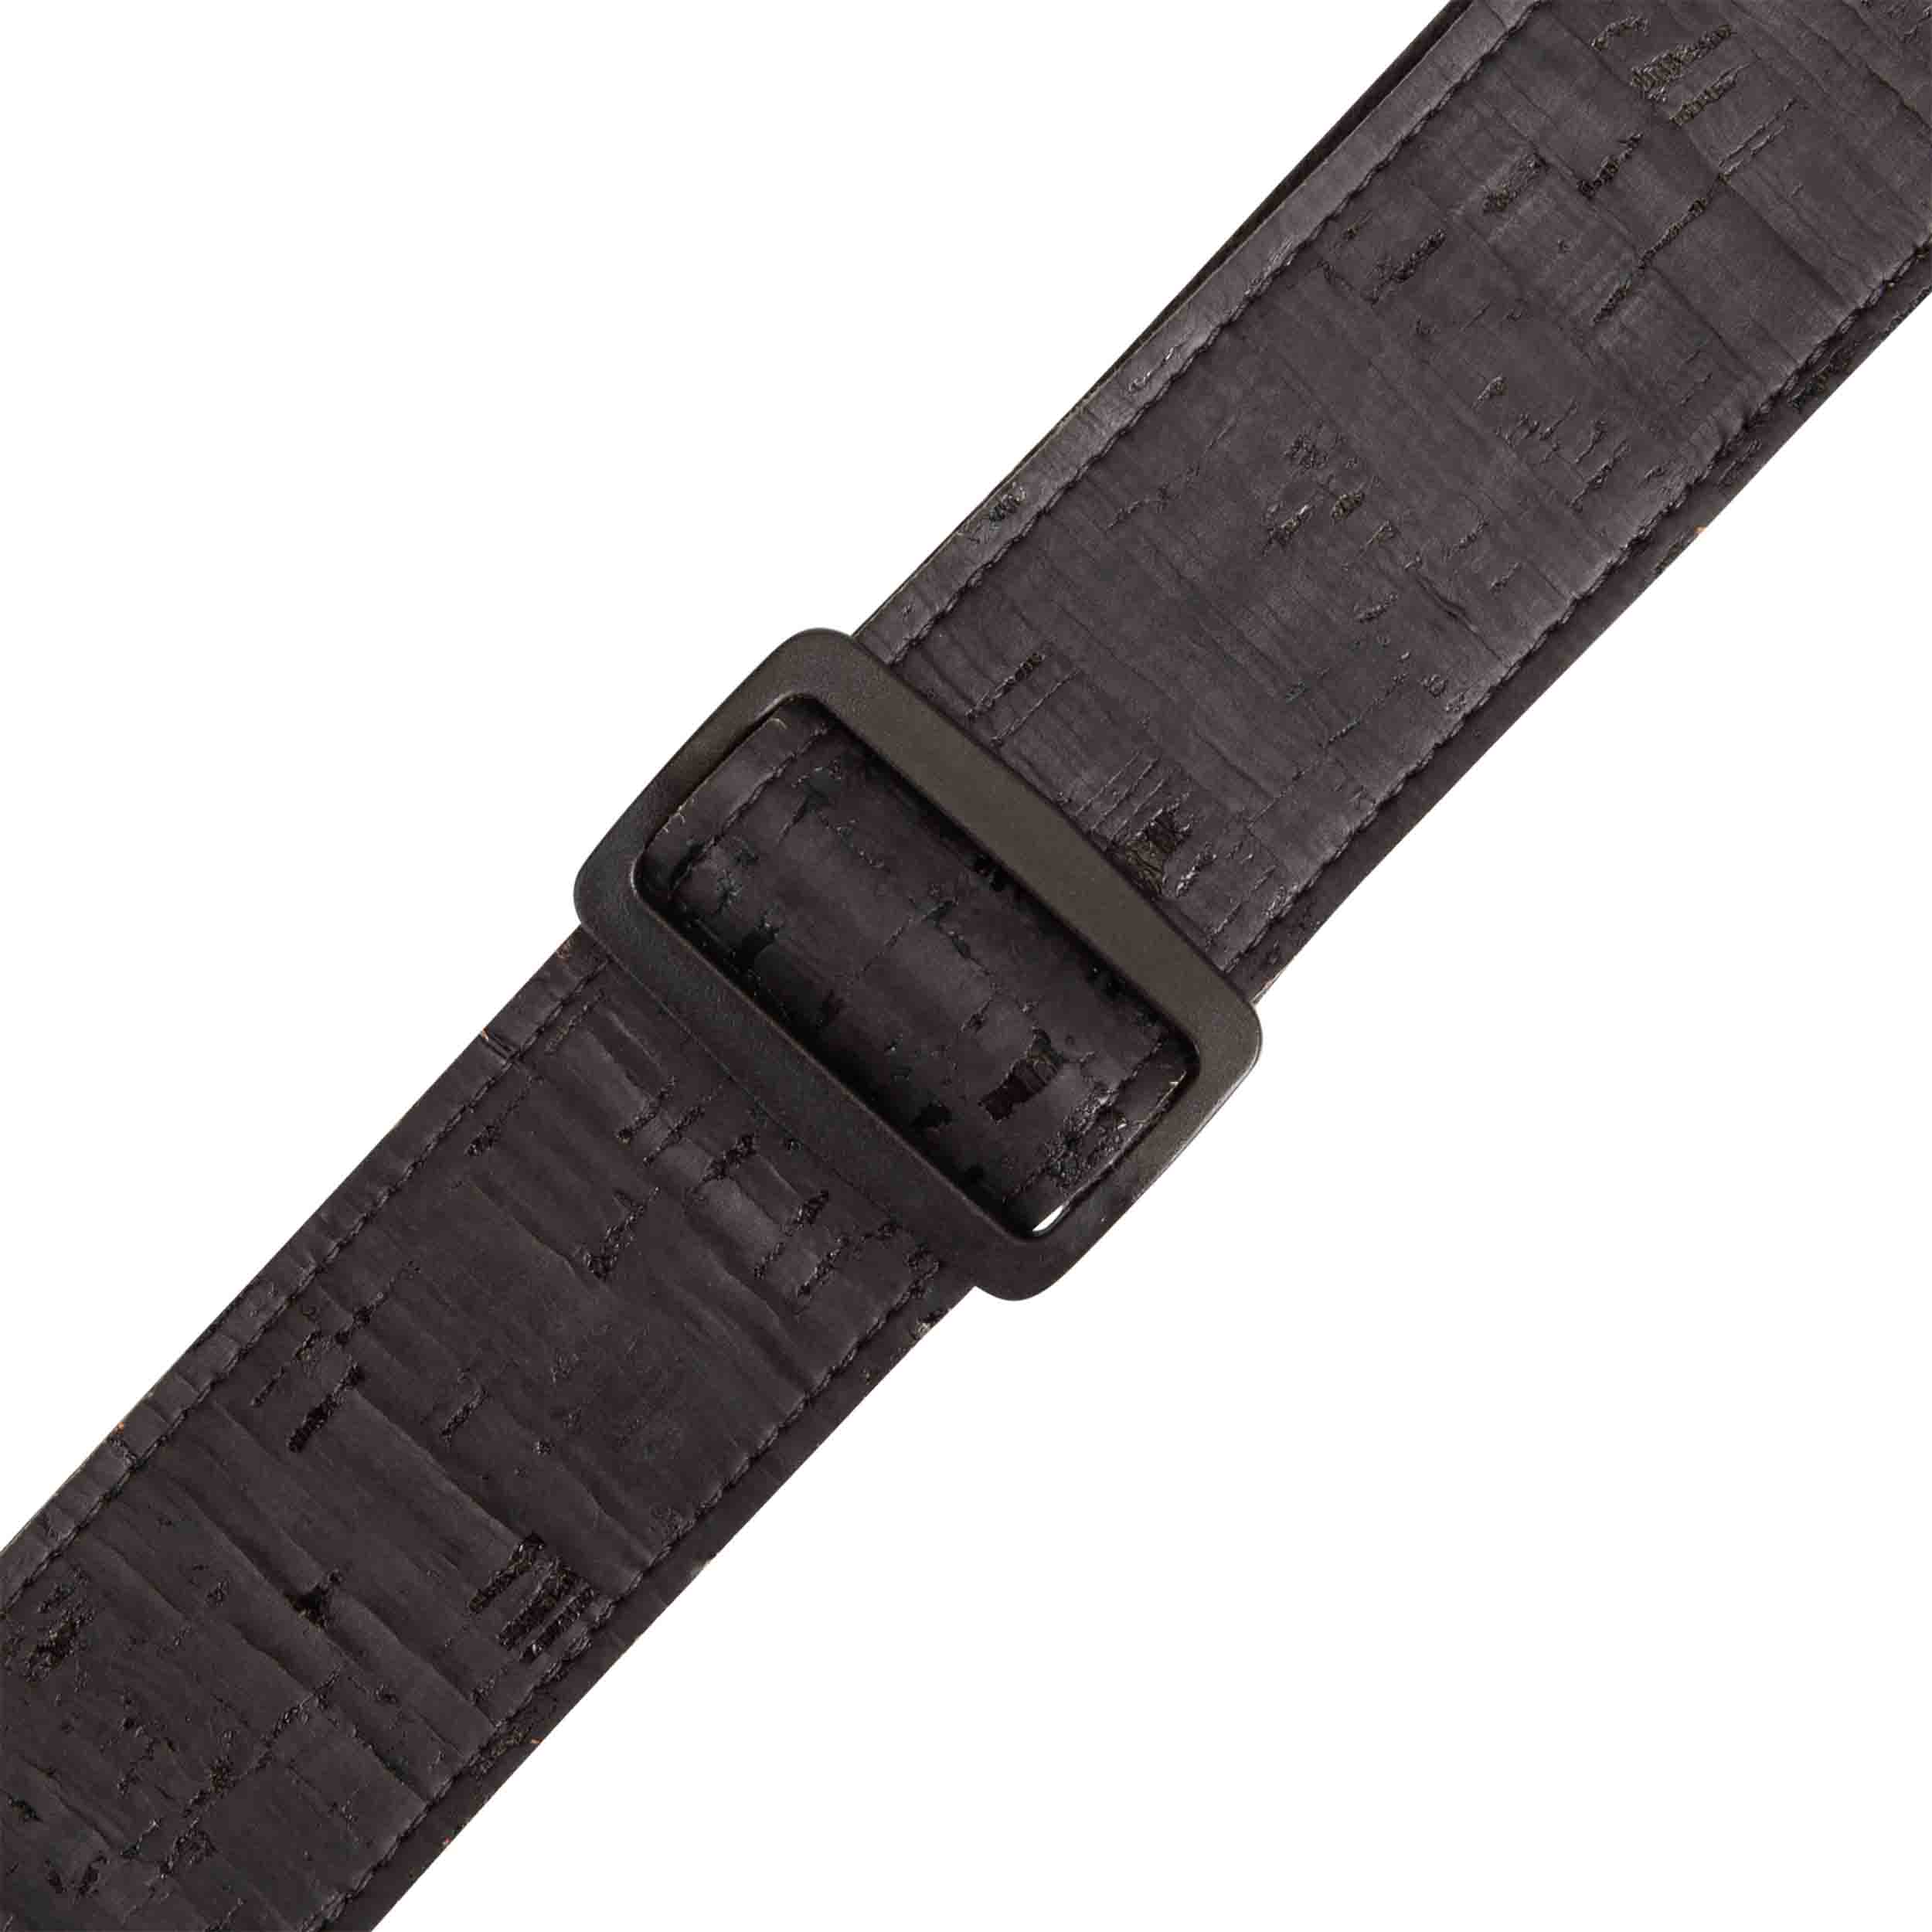 Levy's Leathers MX8-BLK 2-inch Cork Guitar Strap in Black on Black Cotton Webbing - Hollywood DJ